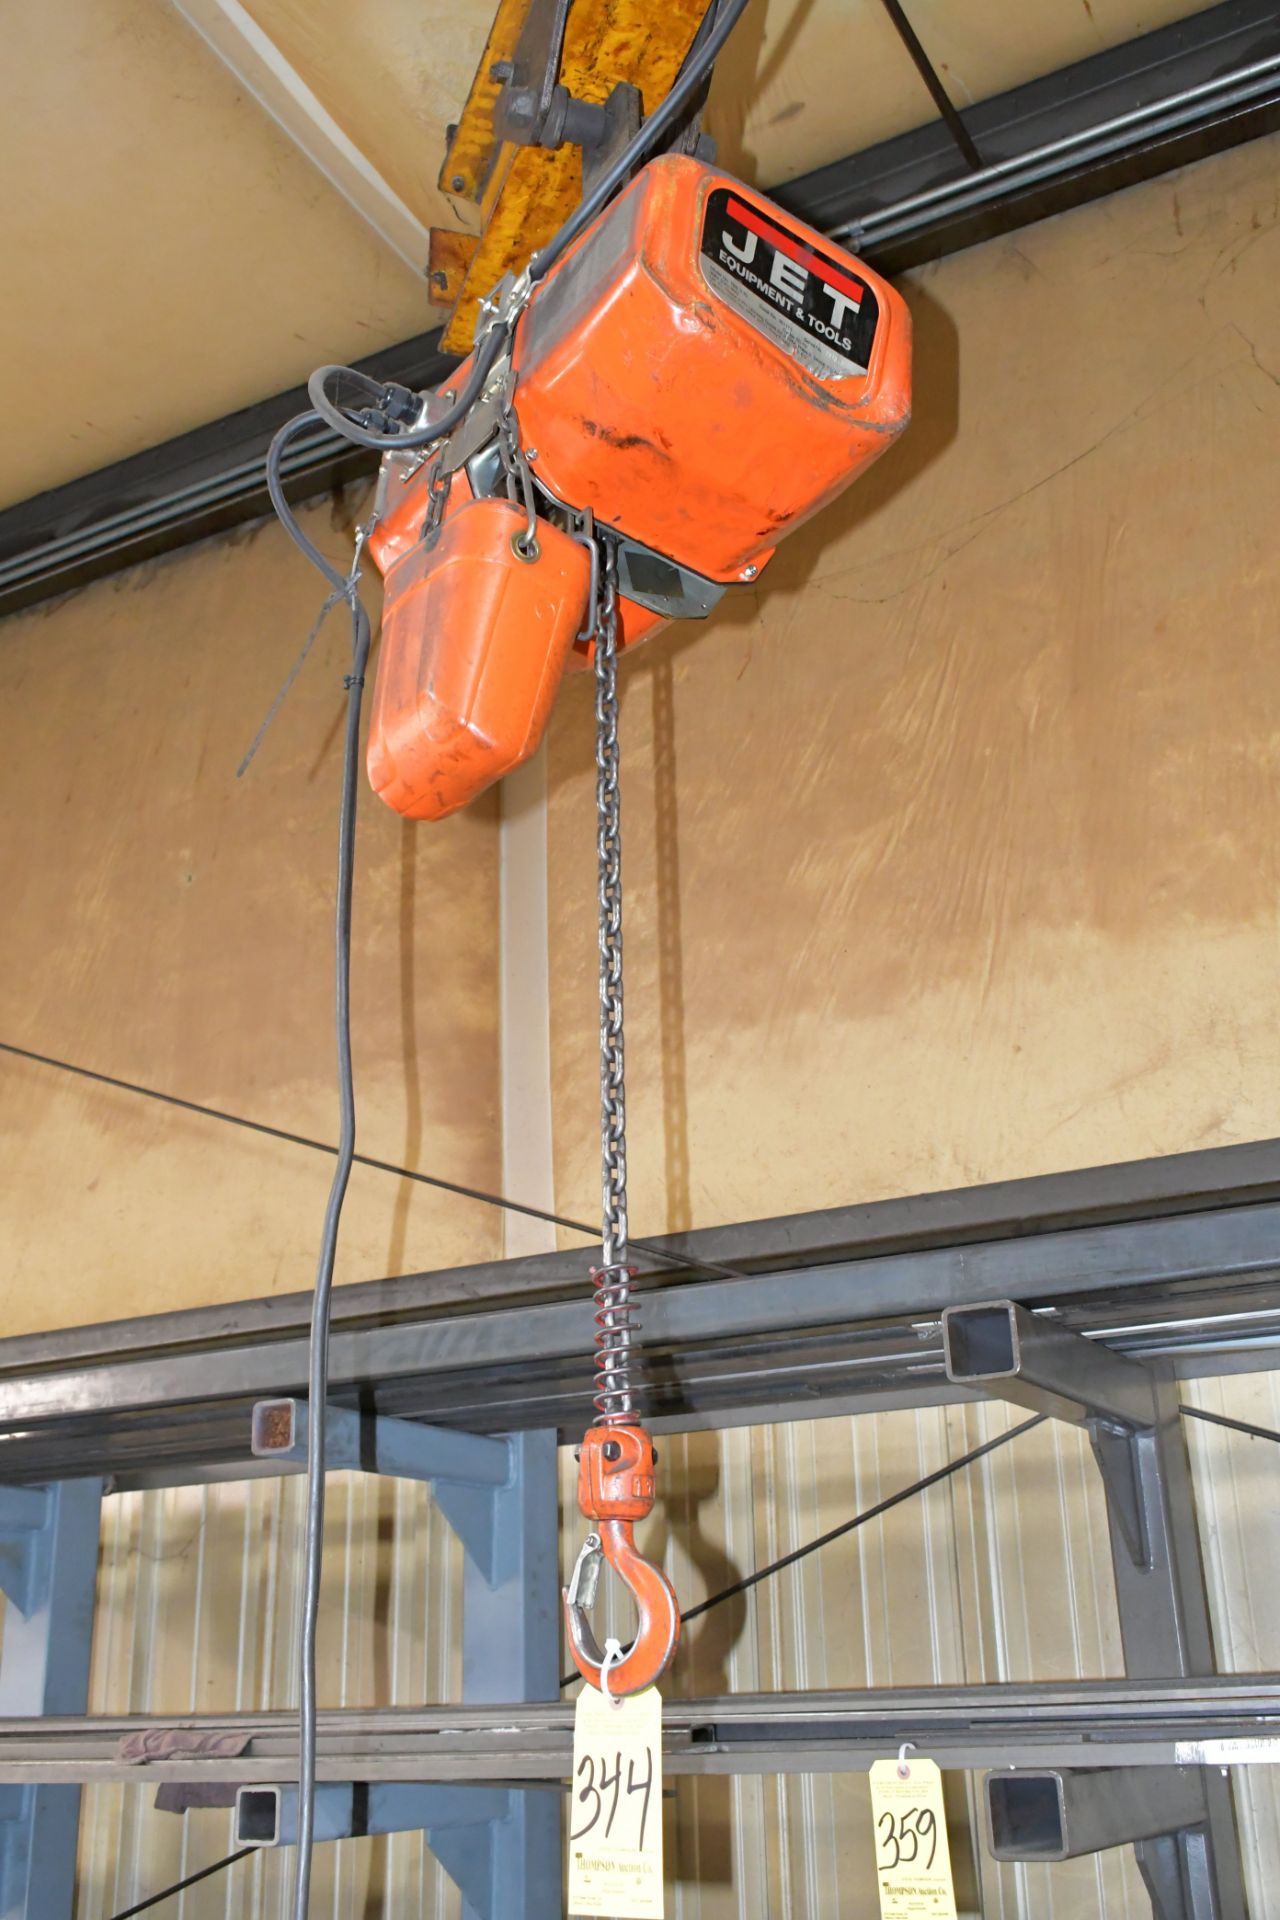 David Round & Son Approx. 11' Reach 360-Degree Floor Mounted Jib Crane with Jet 1-Ton Capacity - Image 2 of 2